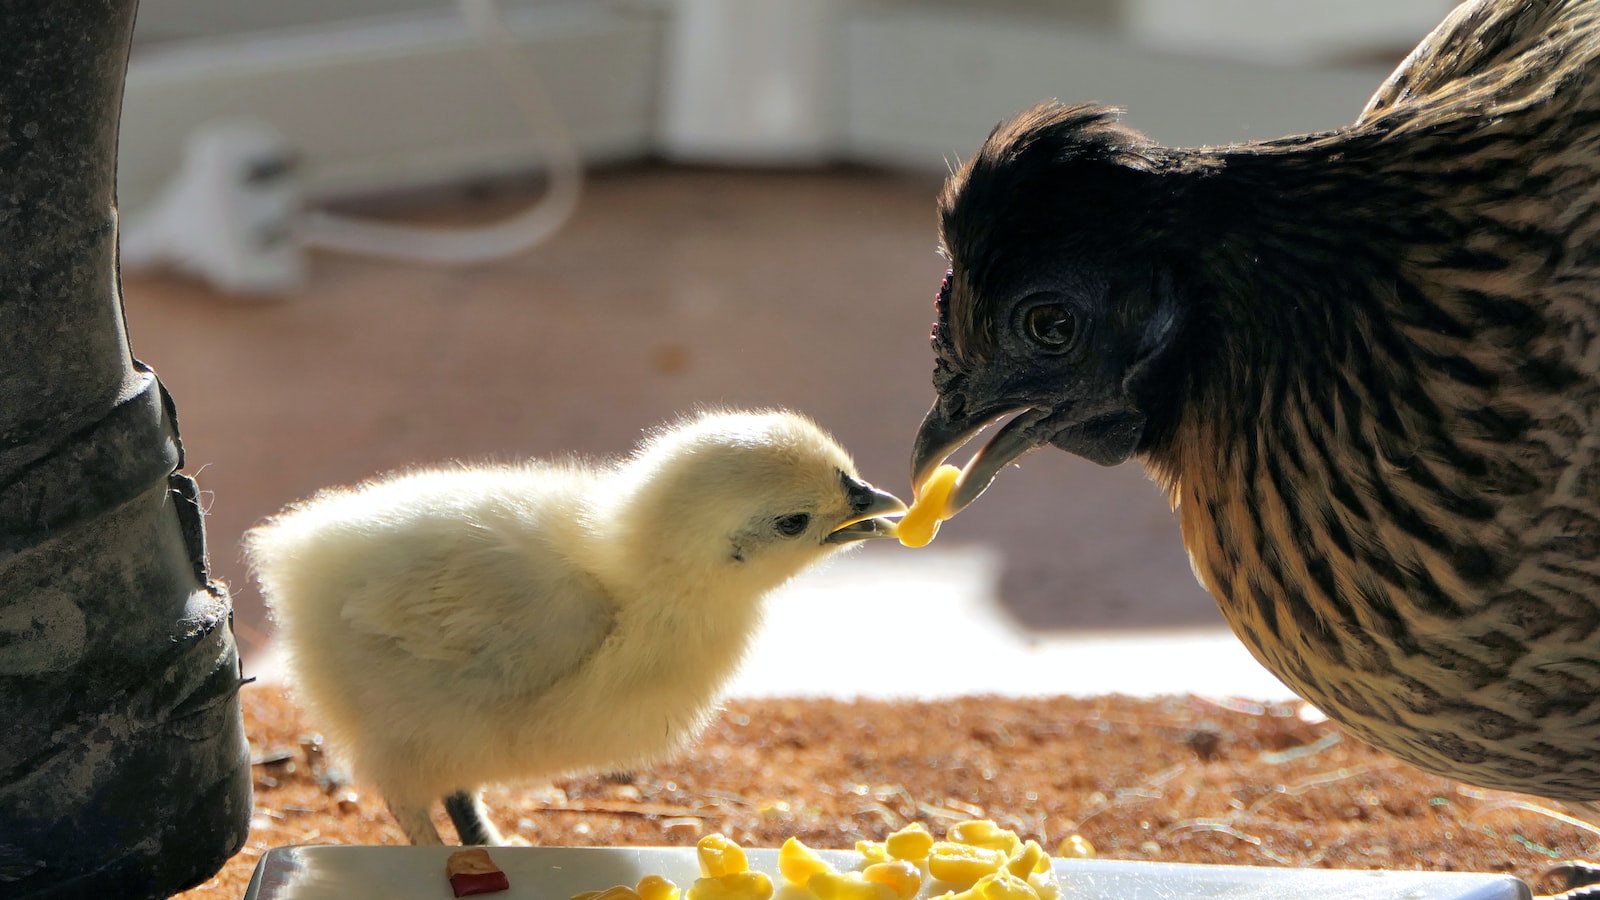 yellow chick and brown hen